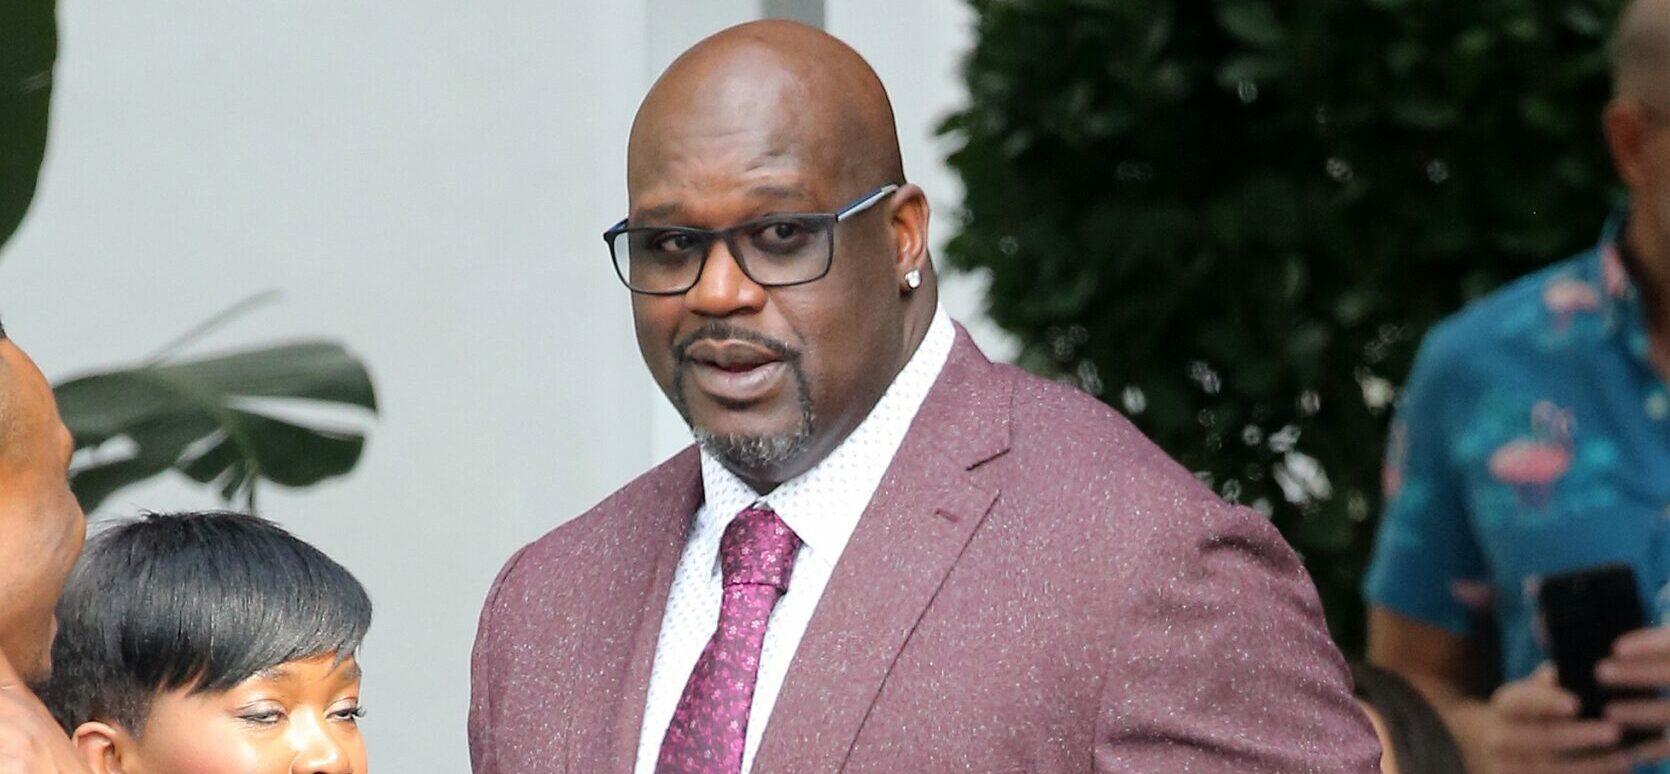 Mystery Woman Seen On Date With Shaquille O’Neal Denies Romance Rumors